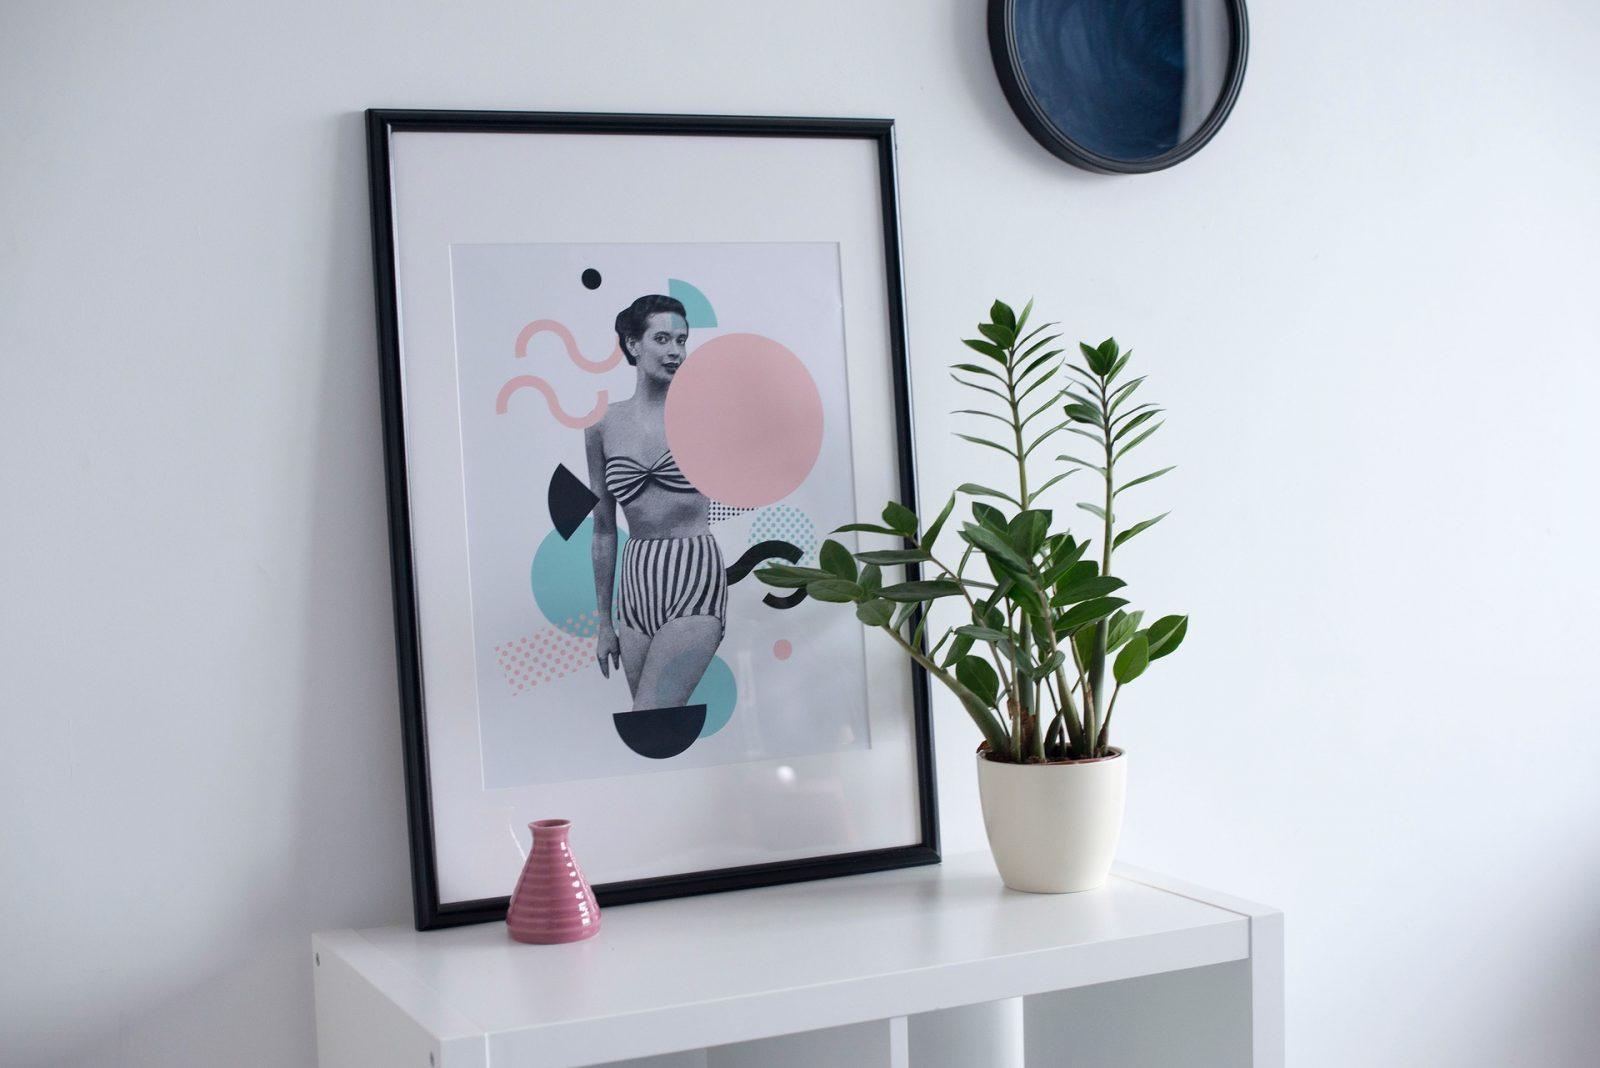 Potted plant, small vase and picture frame propped onto a shelf